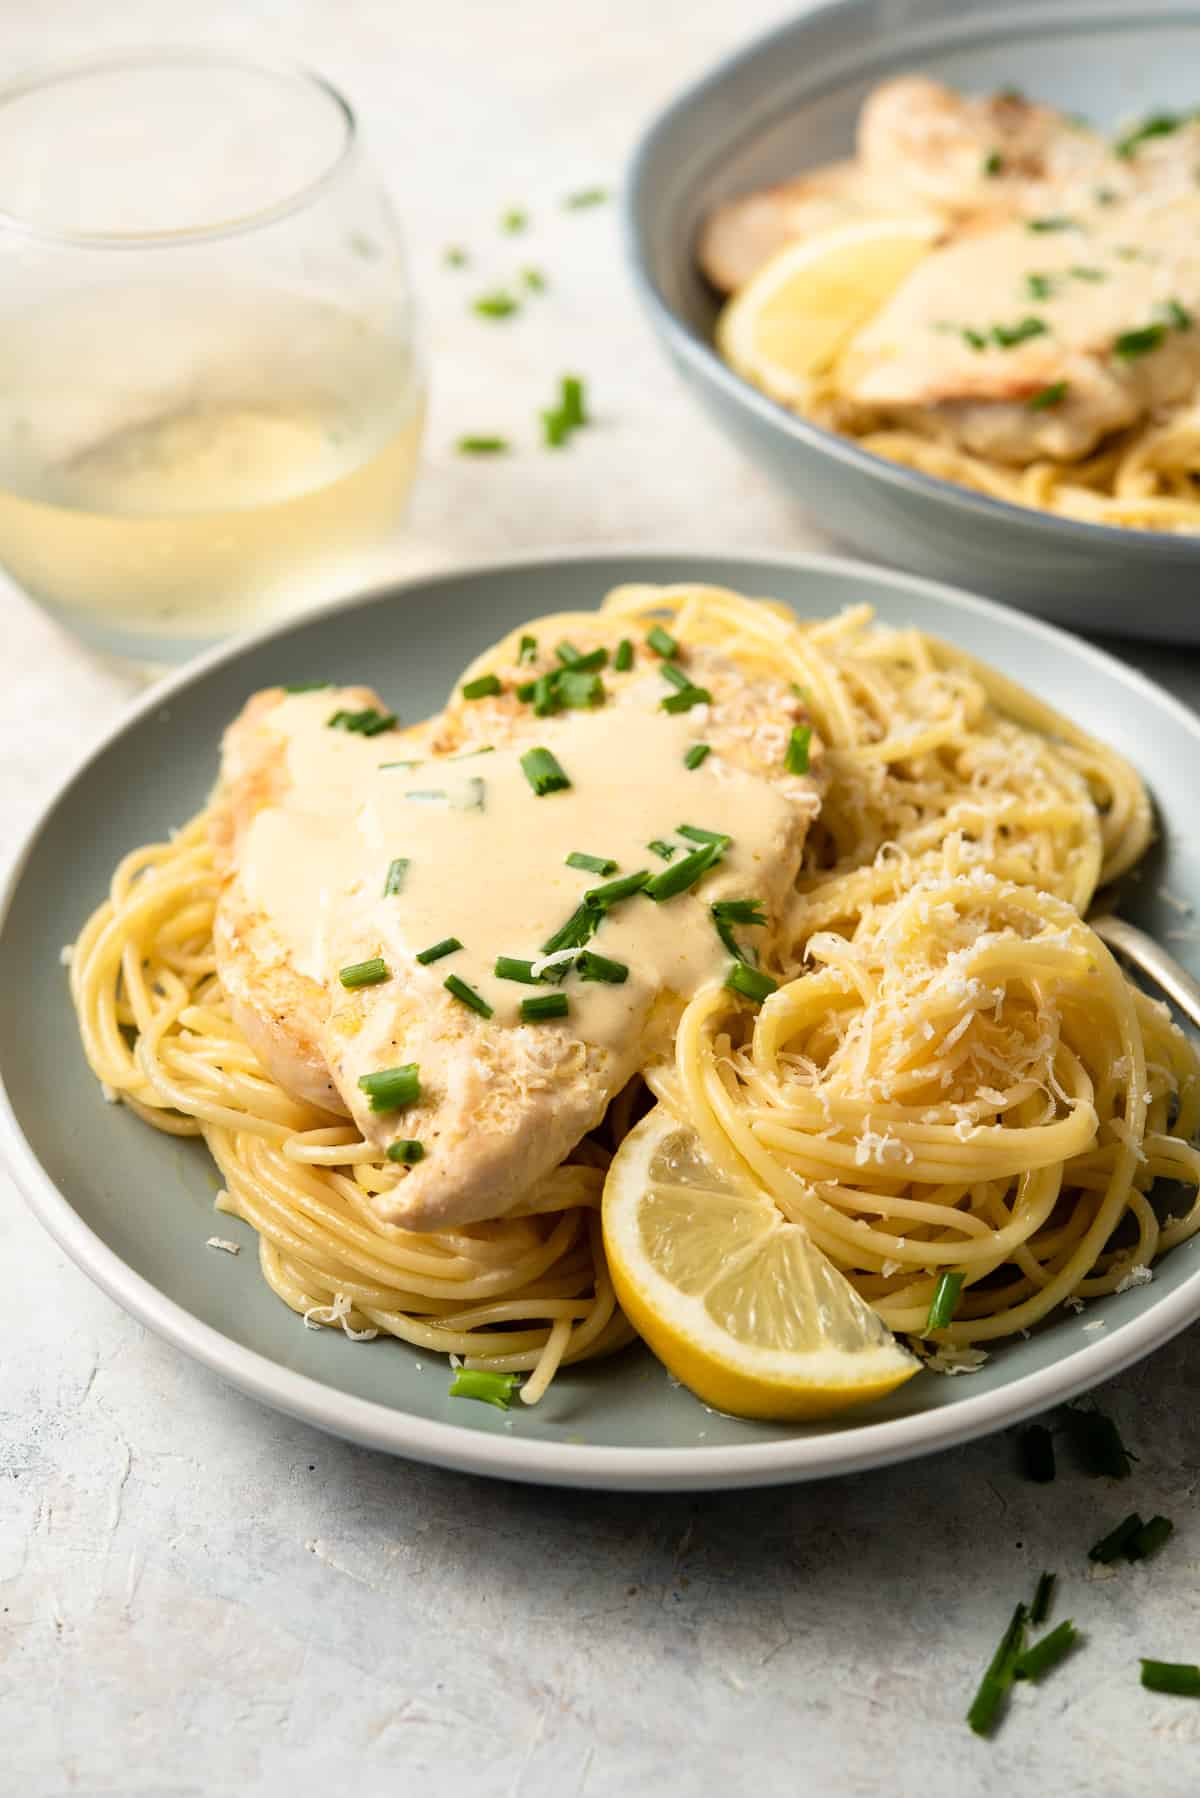 Chicken Scallopini with Parmesan noodles on a plate with lemon wedges.